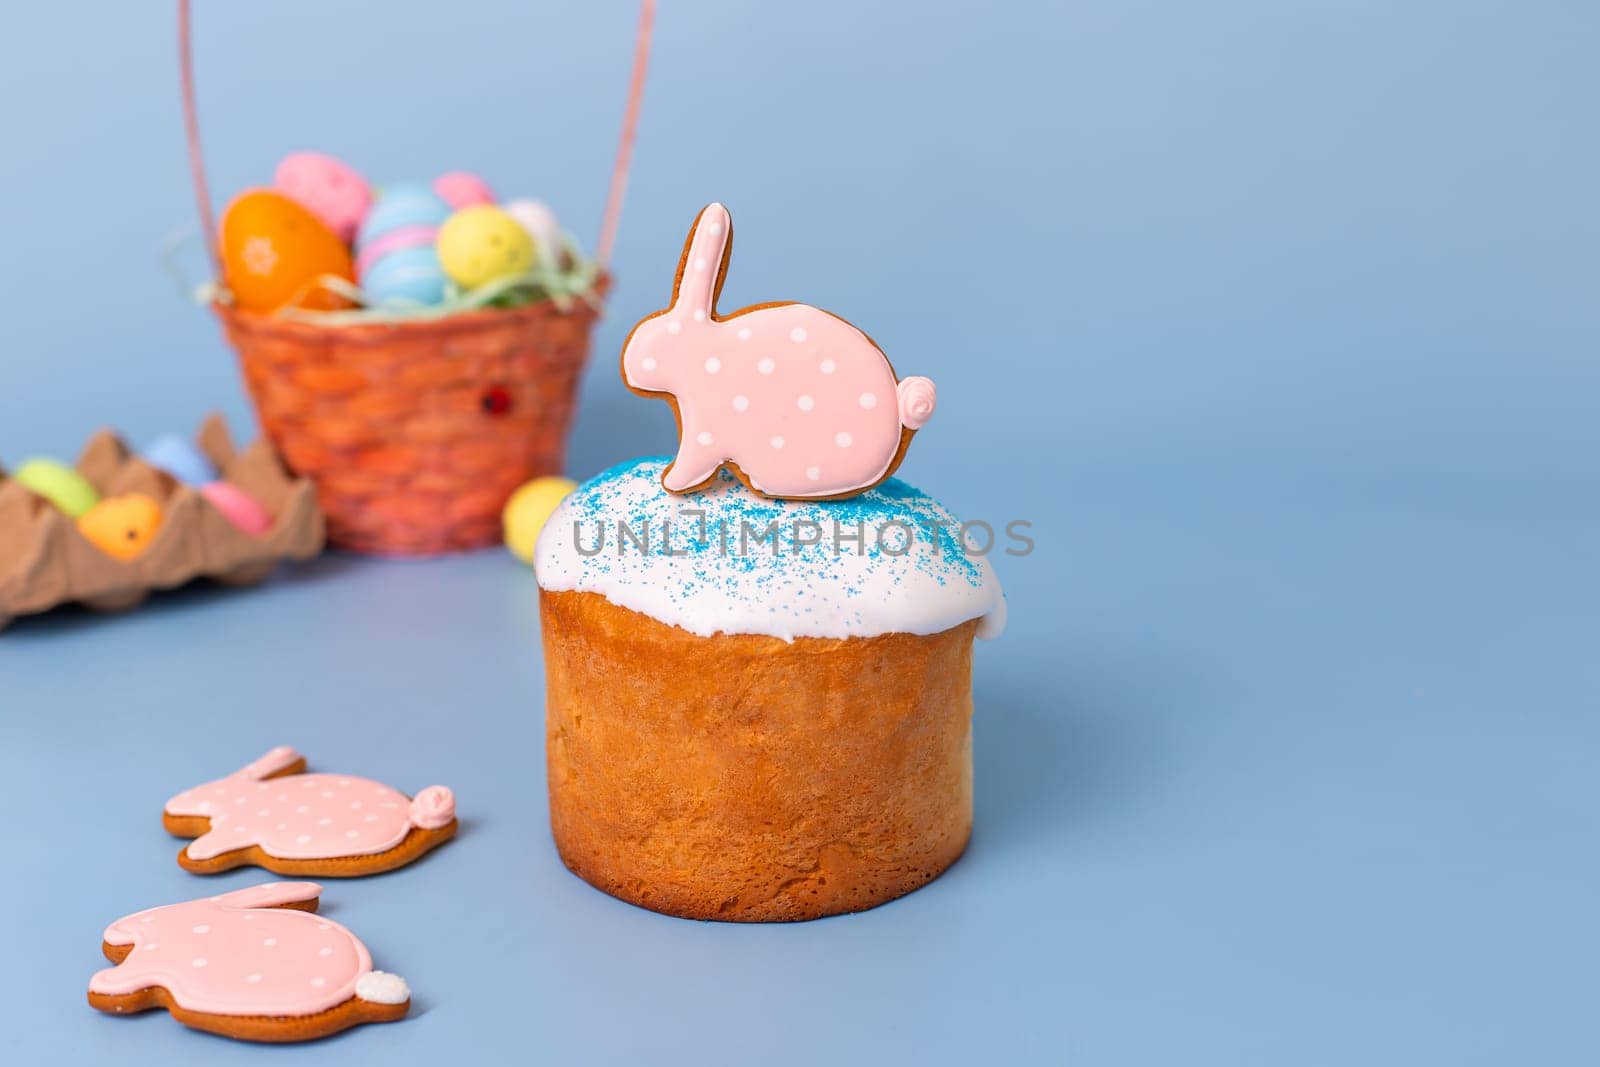 Tasty pink gingerbread in the form of a rabbit on Easter cake stand on a blue background.